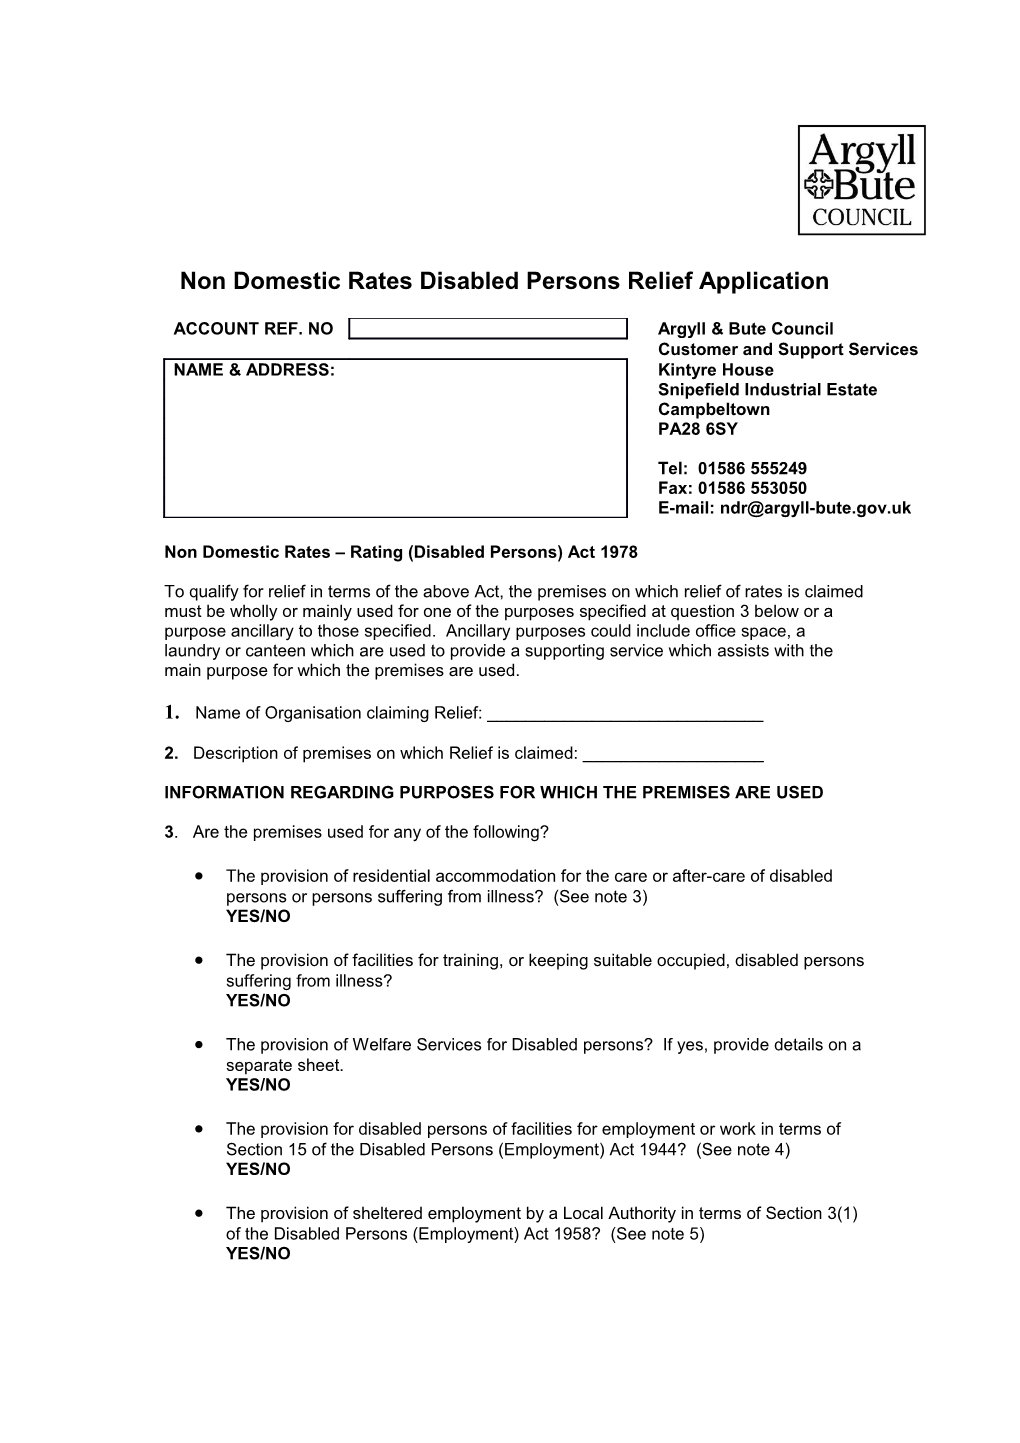 Non Domestic Rates Disabled Persons Relief Application